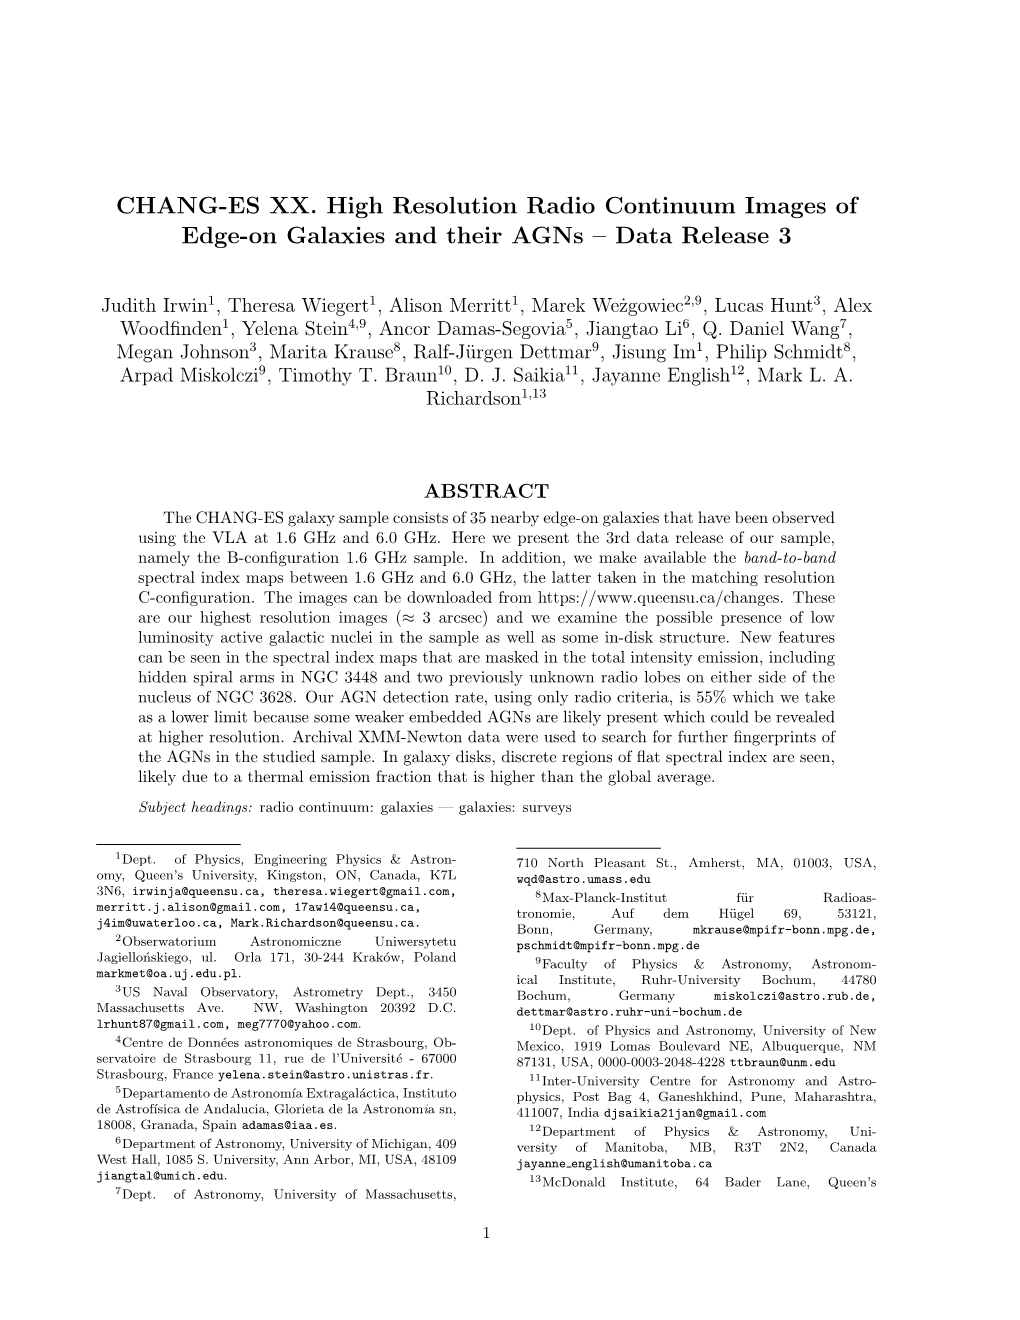 CHANG-ES XX. High Resolution Radio Continuum Images of Edge-On Galaxies and Their Agns – Data Release 3